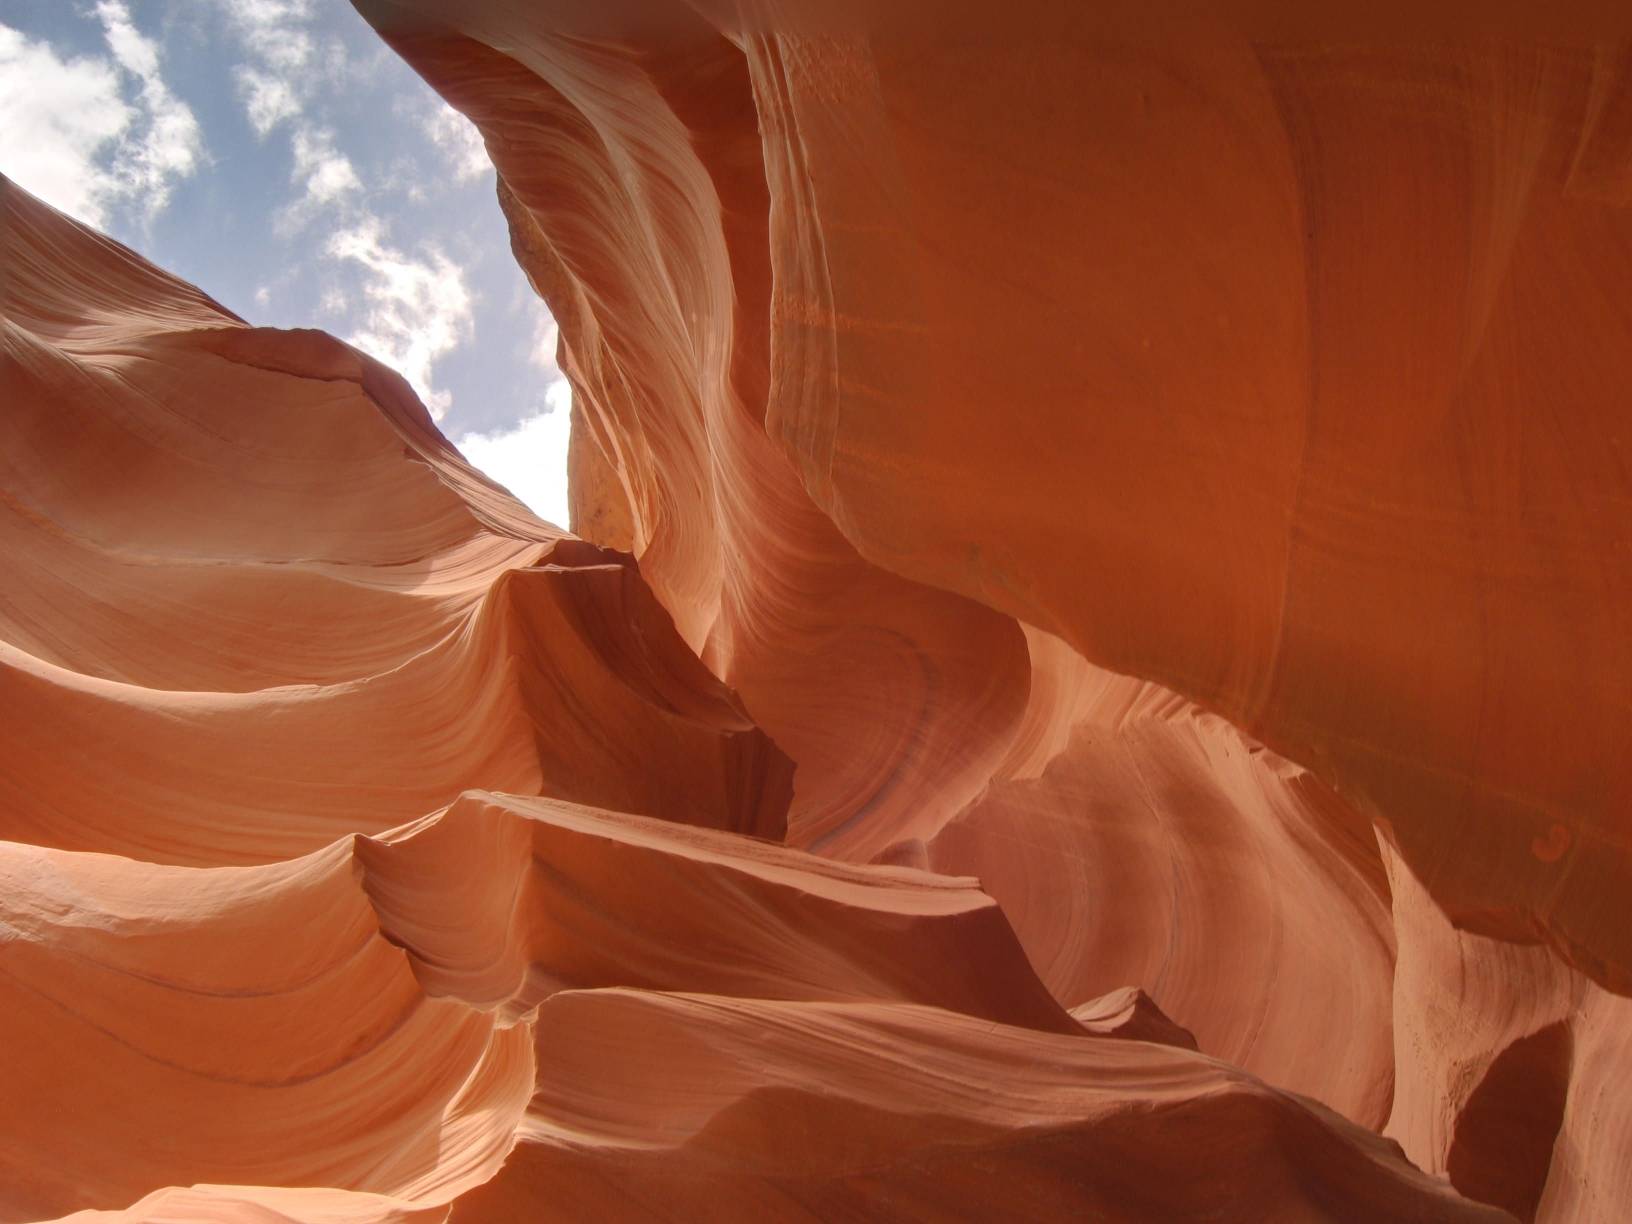 Image: The crevices of the Lower Antelope Canyon